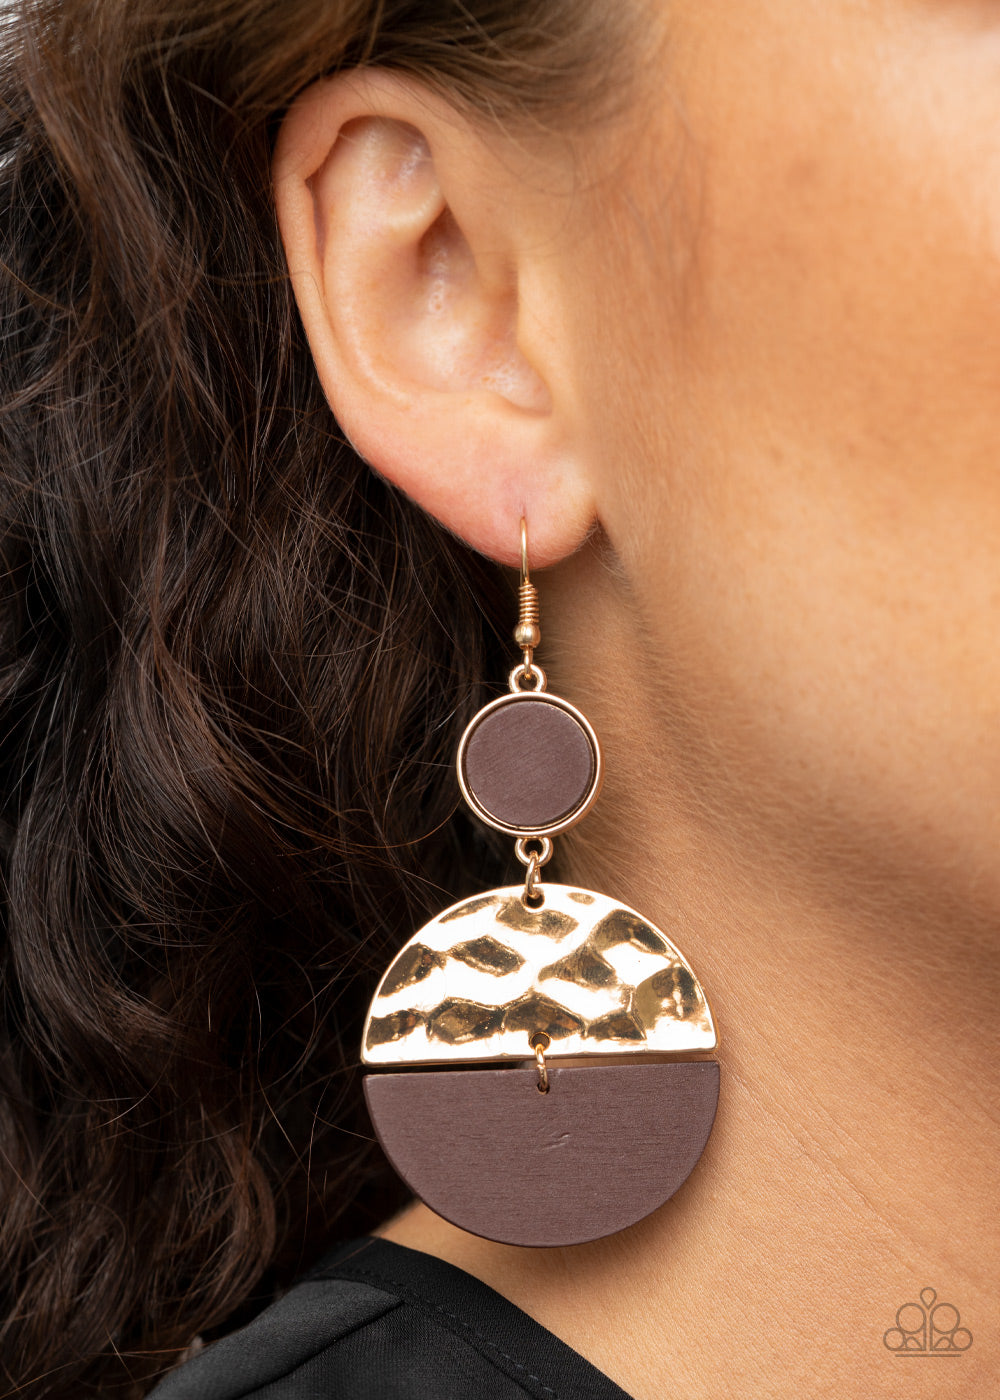 Natural Element Gold
Earrings